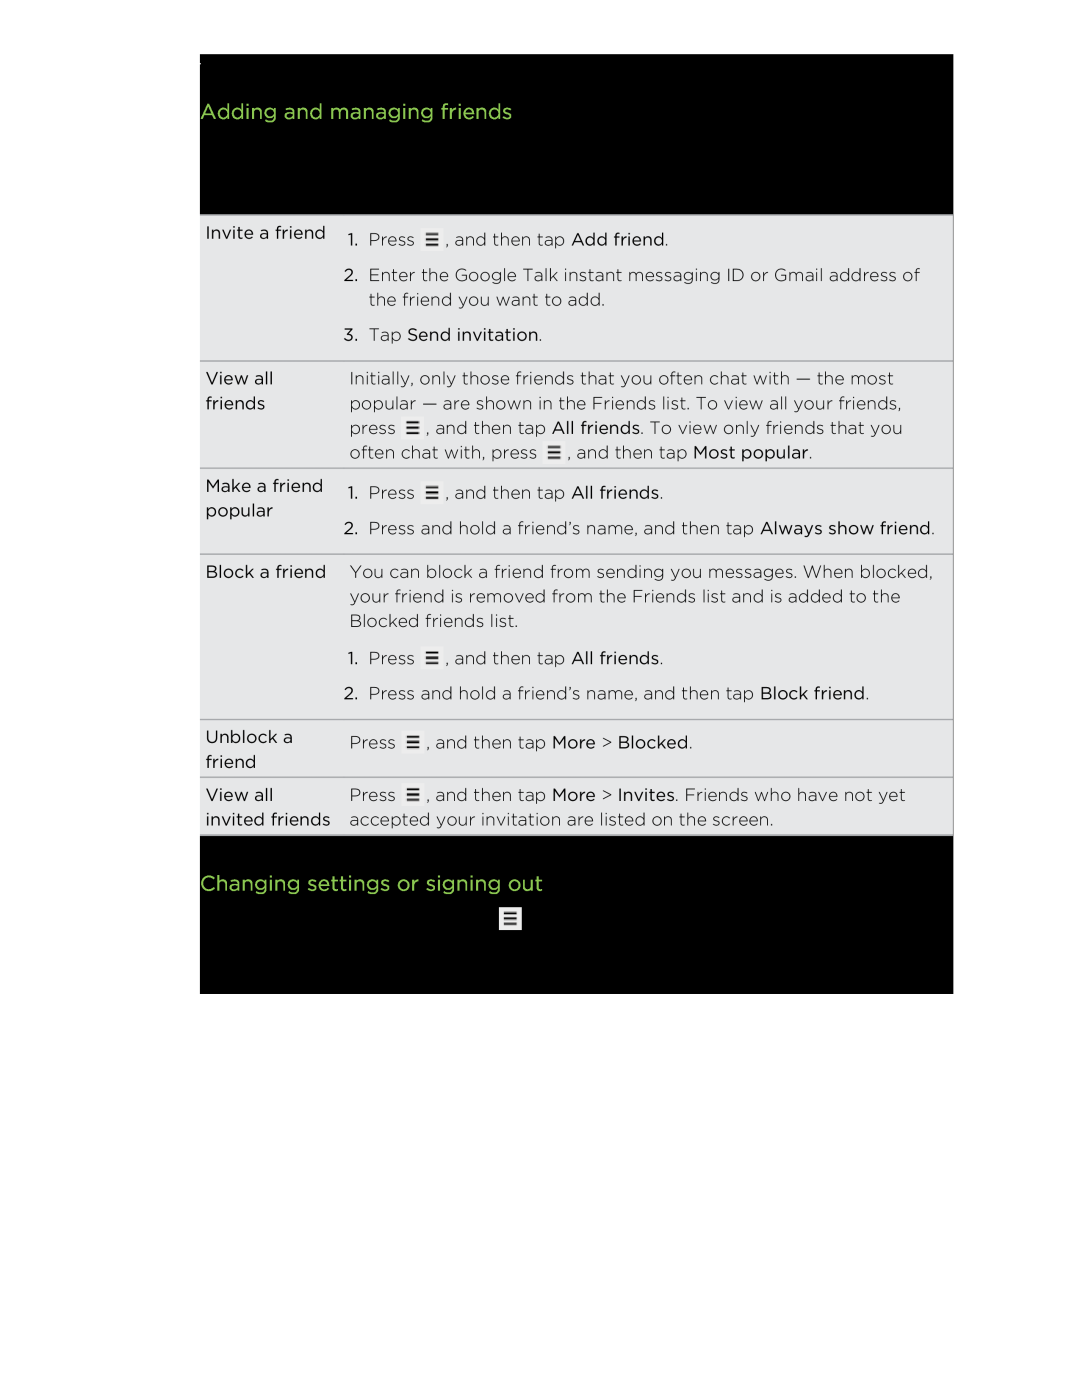 HTC manual Adding and managing friends, Changing settings or signing out, Social 